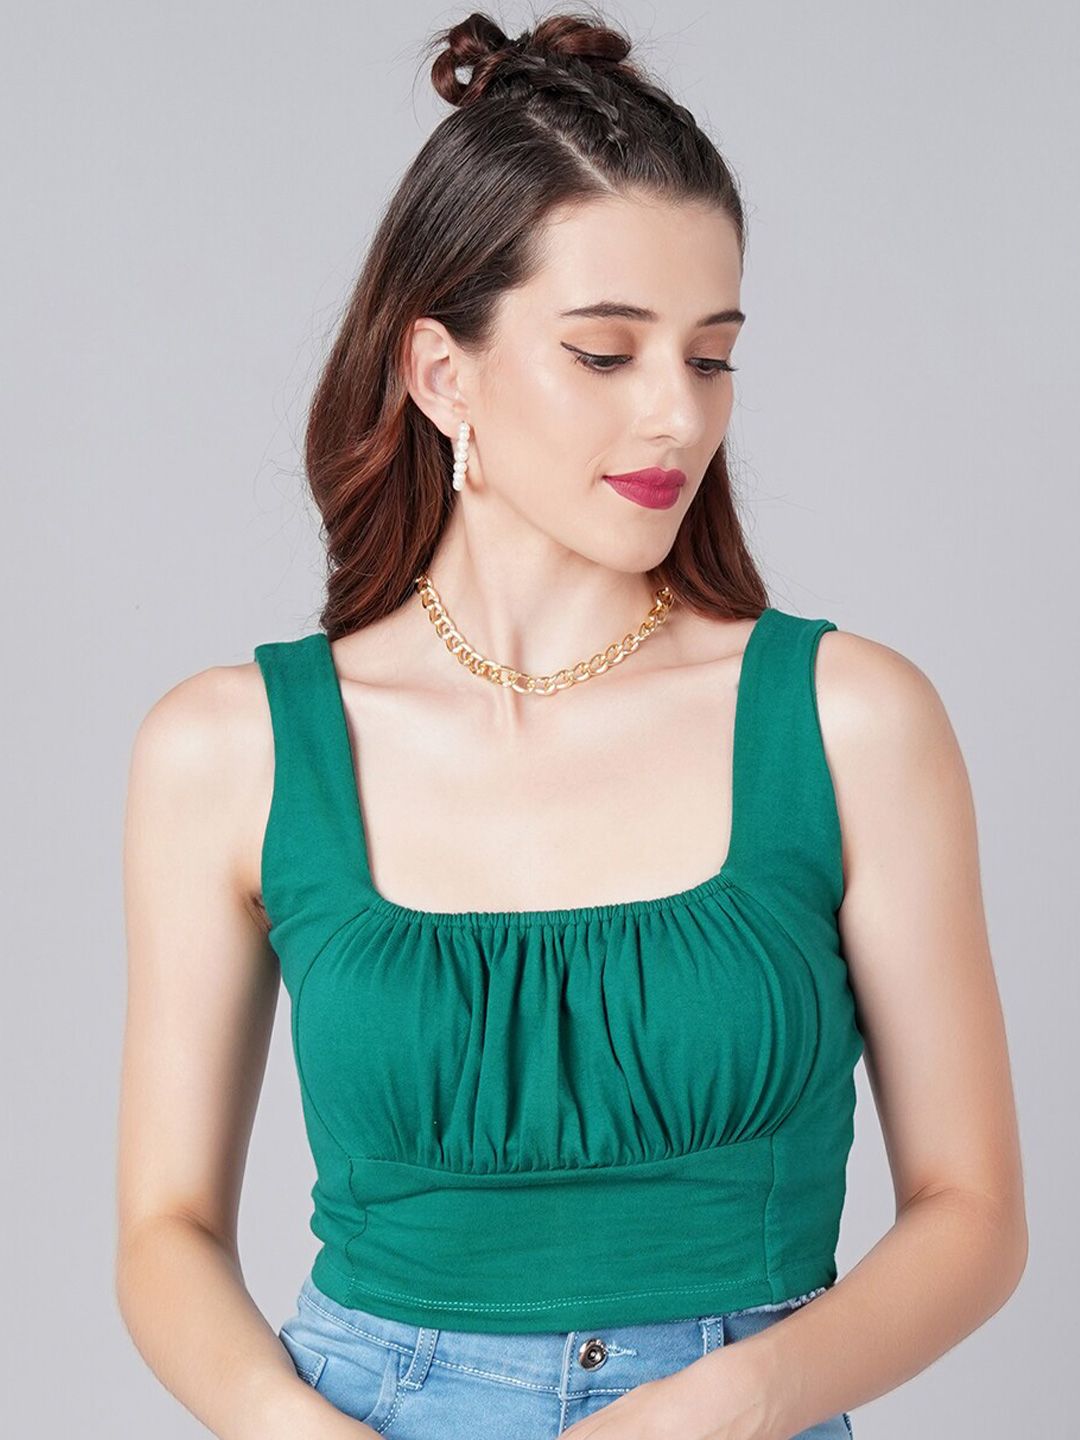 Cation Women Green Fringed Bralette Cotton Crop Top Price in India